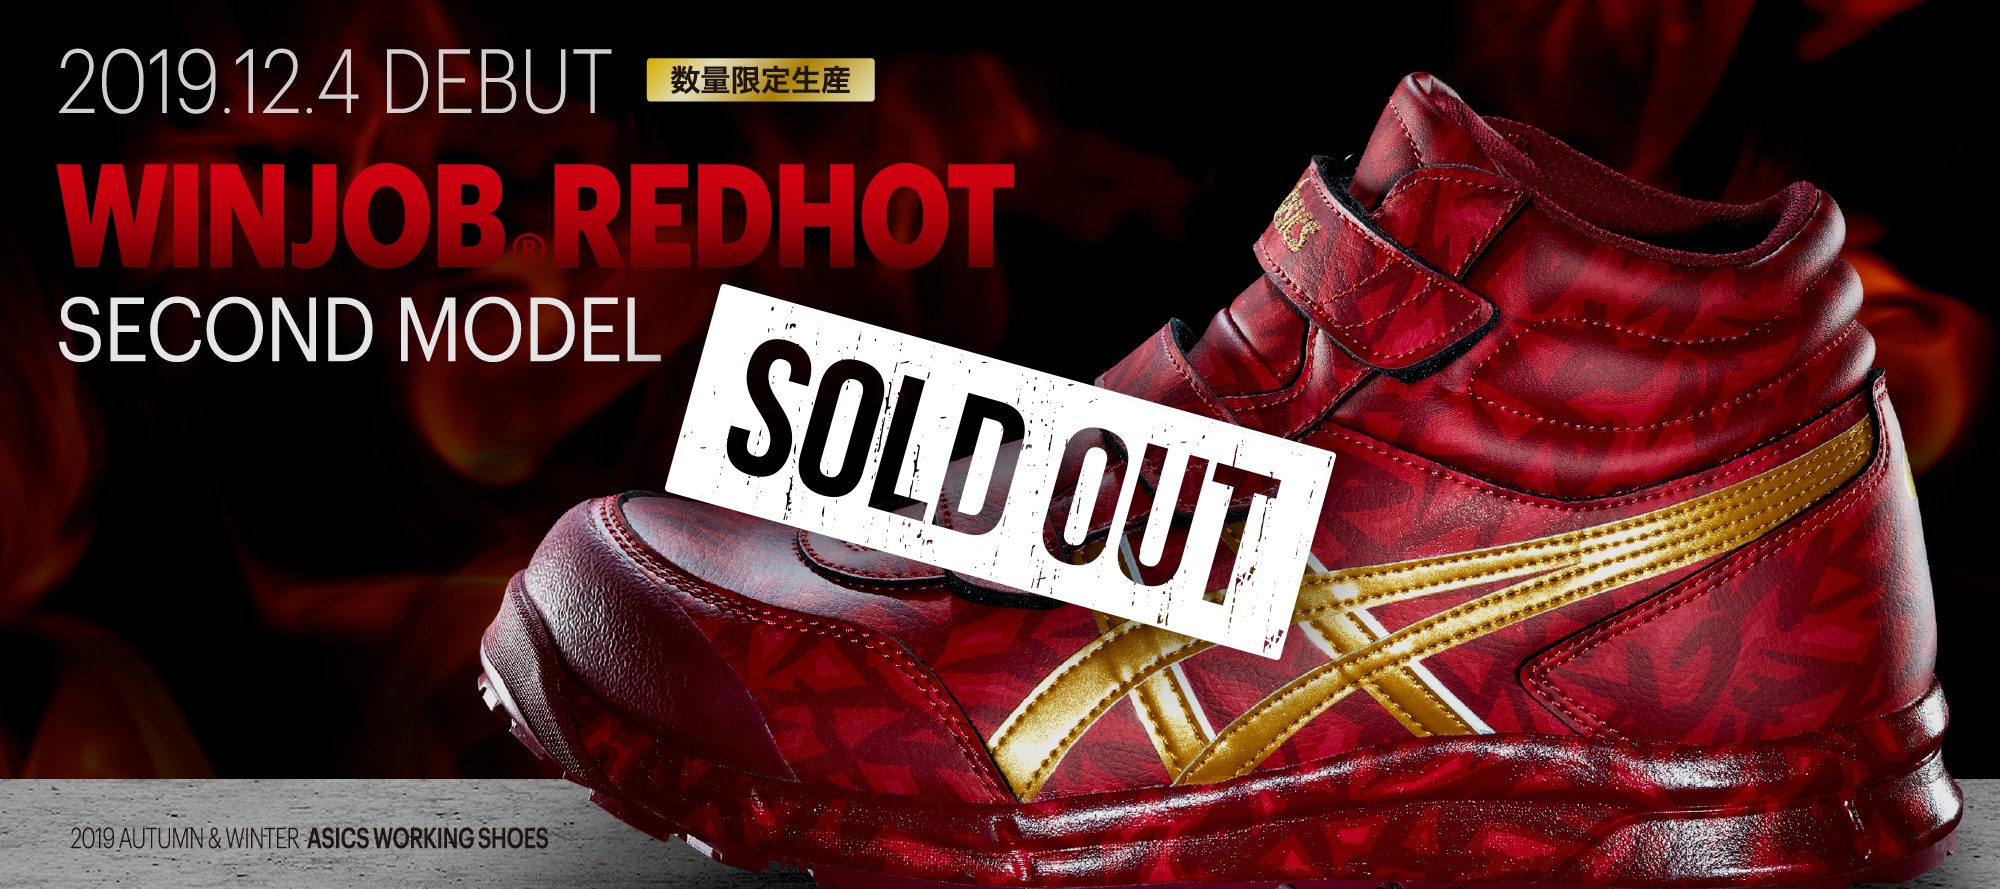 【SOLD OUT】2019.12.4 DEBUT WINJOB®REDHOT SECOND MODEL